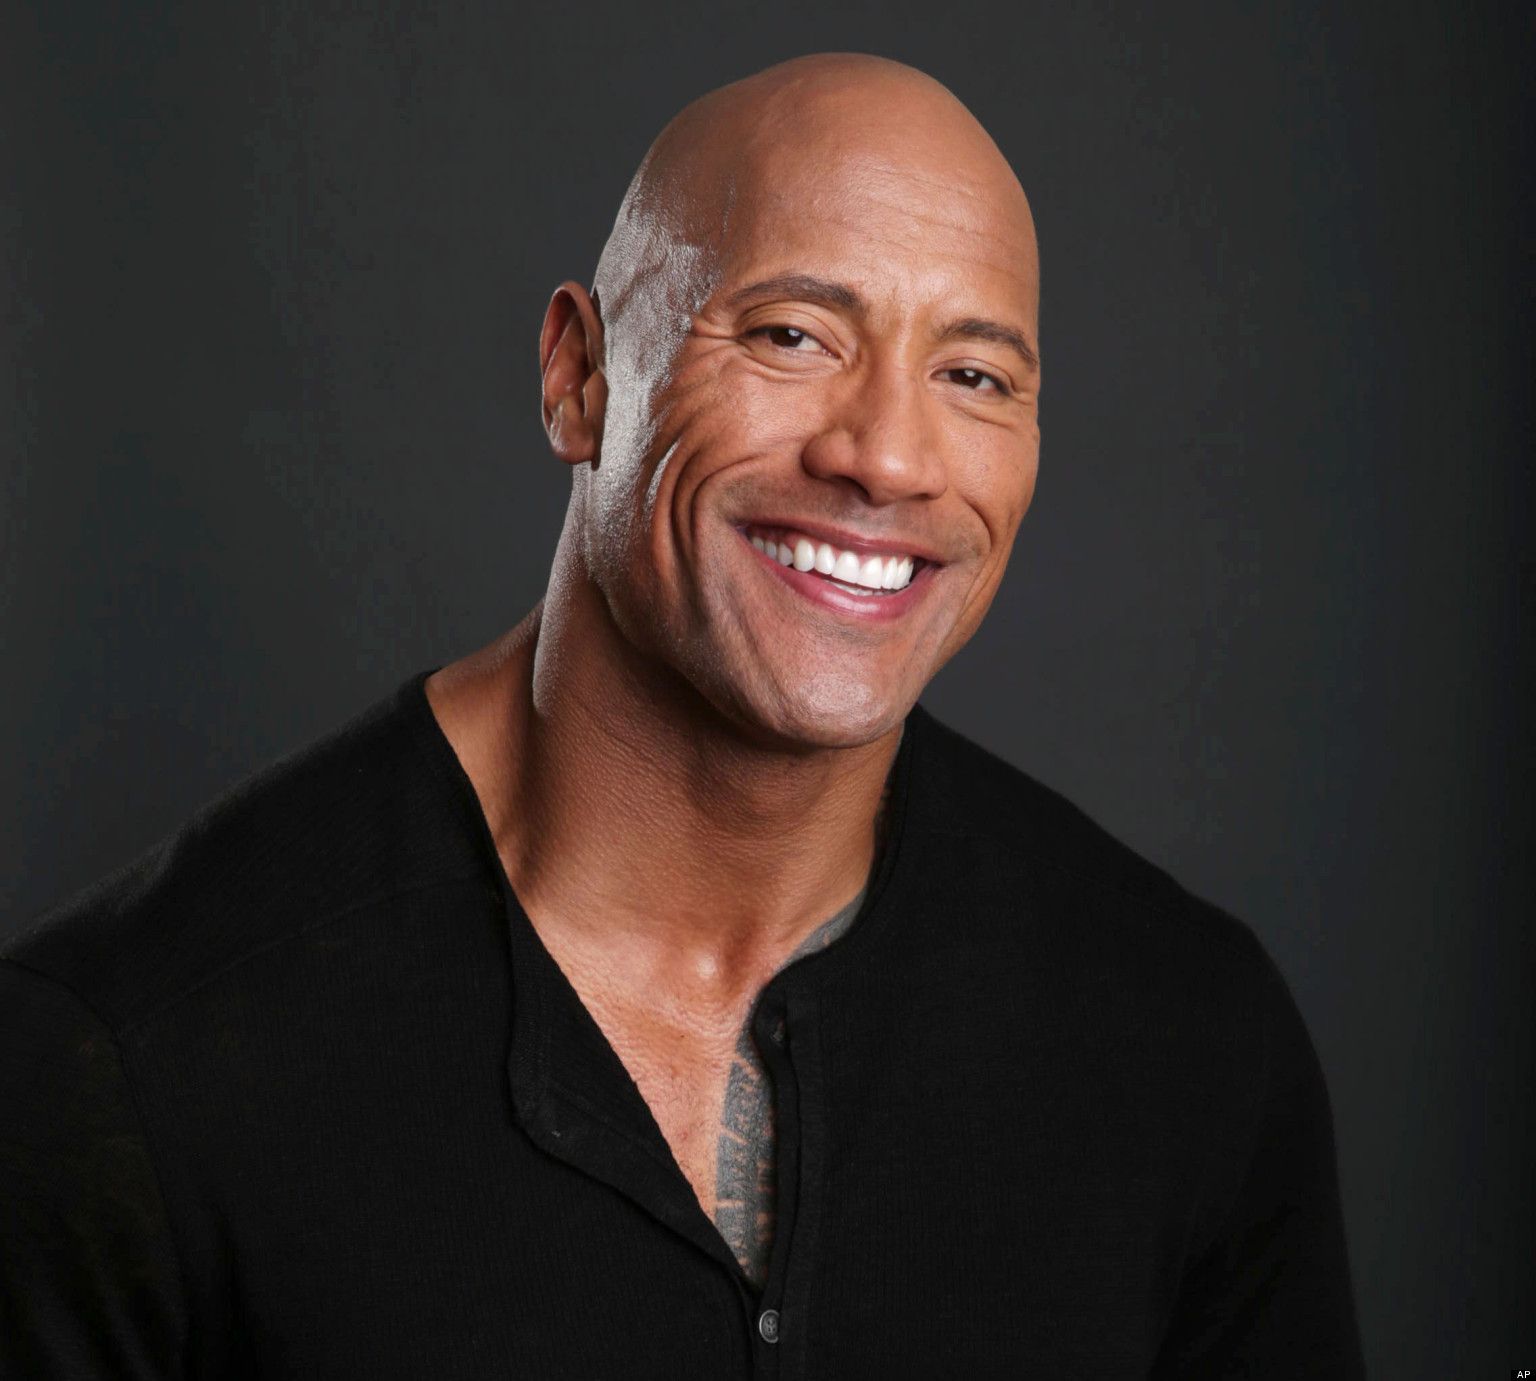 I Cannot Wait To Come To India: Dwayne Johnson